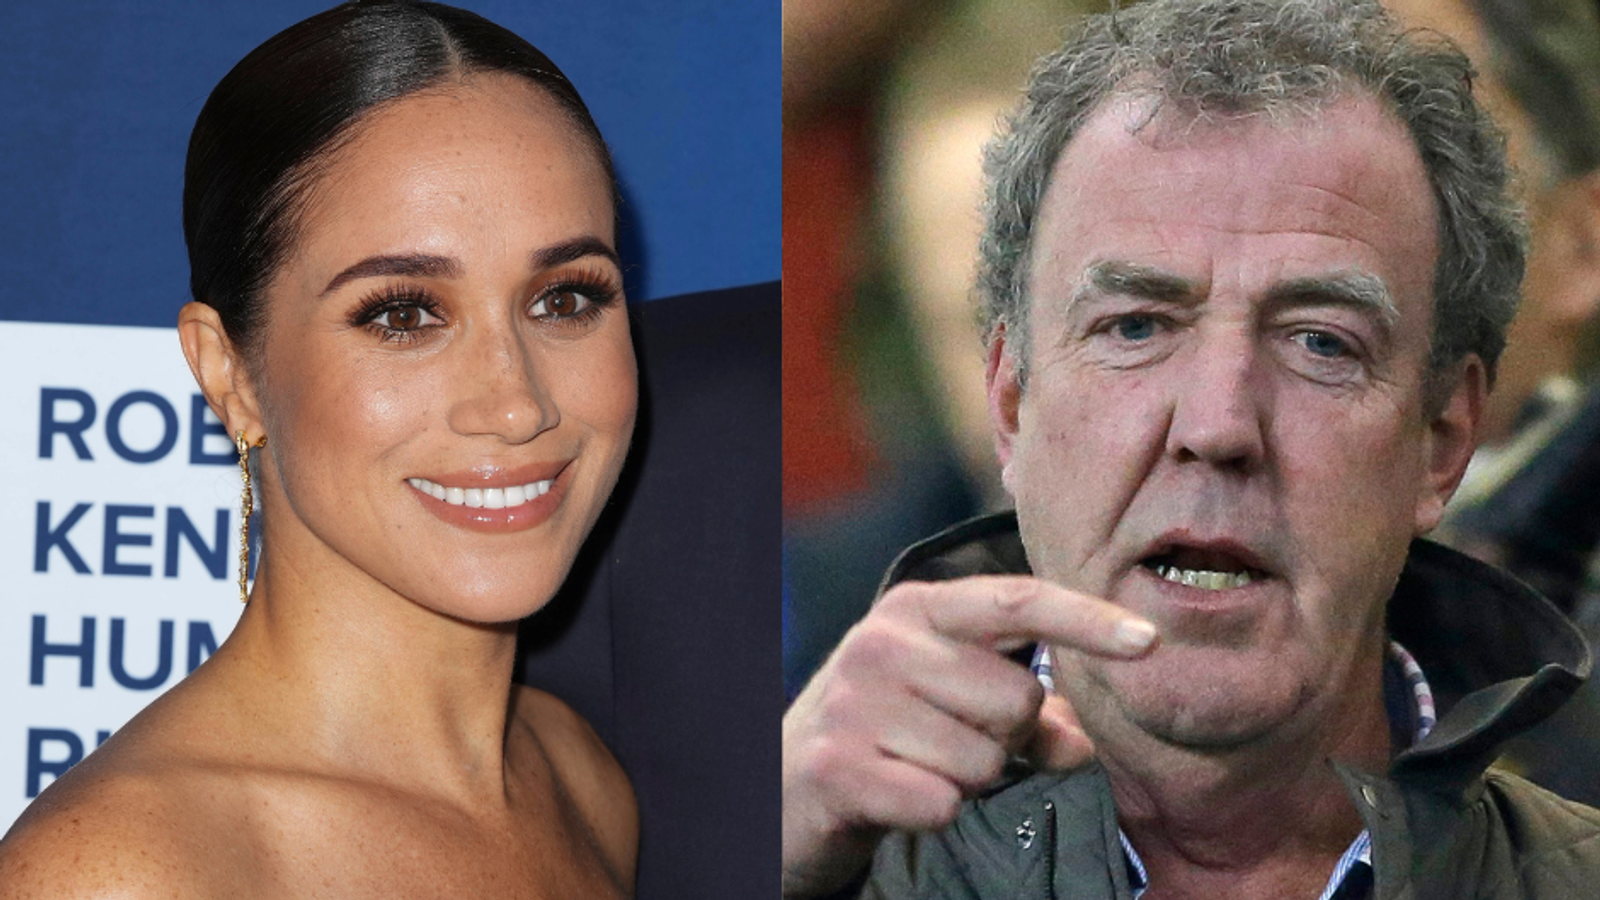 Jeremy Clarkson responds after Meghan column backlash, saying 'I’m horrified to have caused so much hurt' 